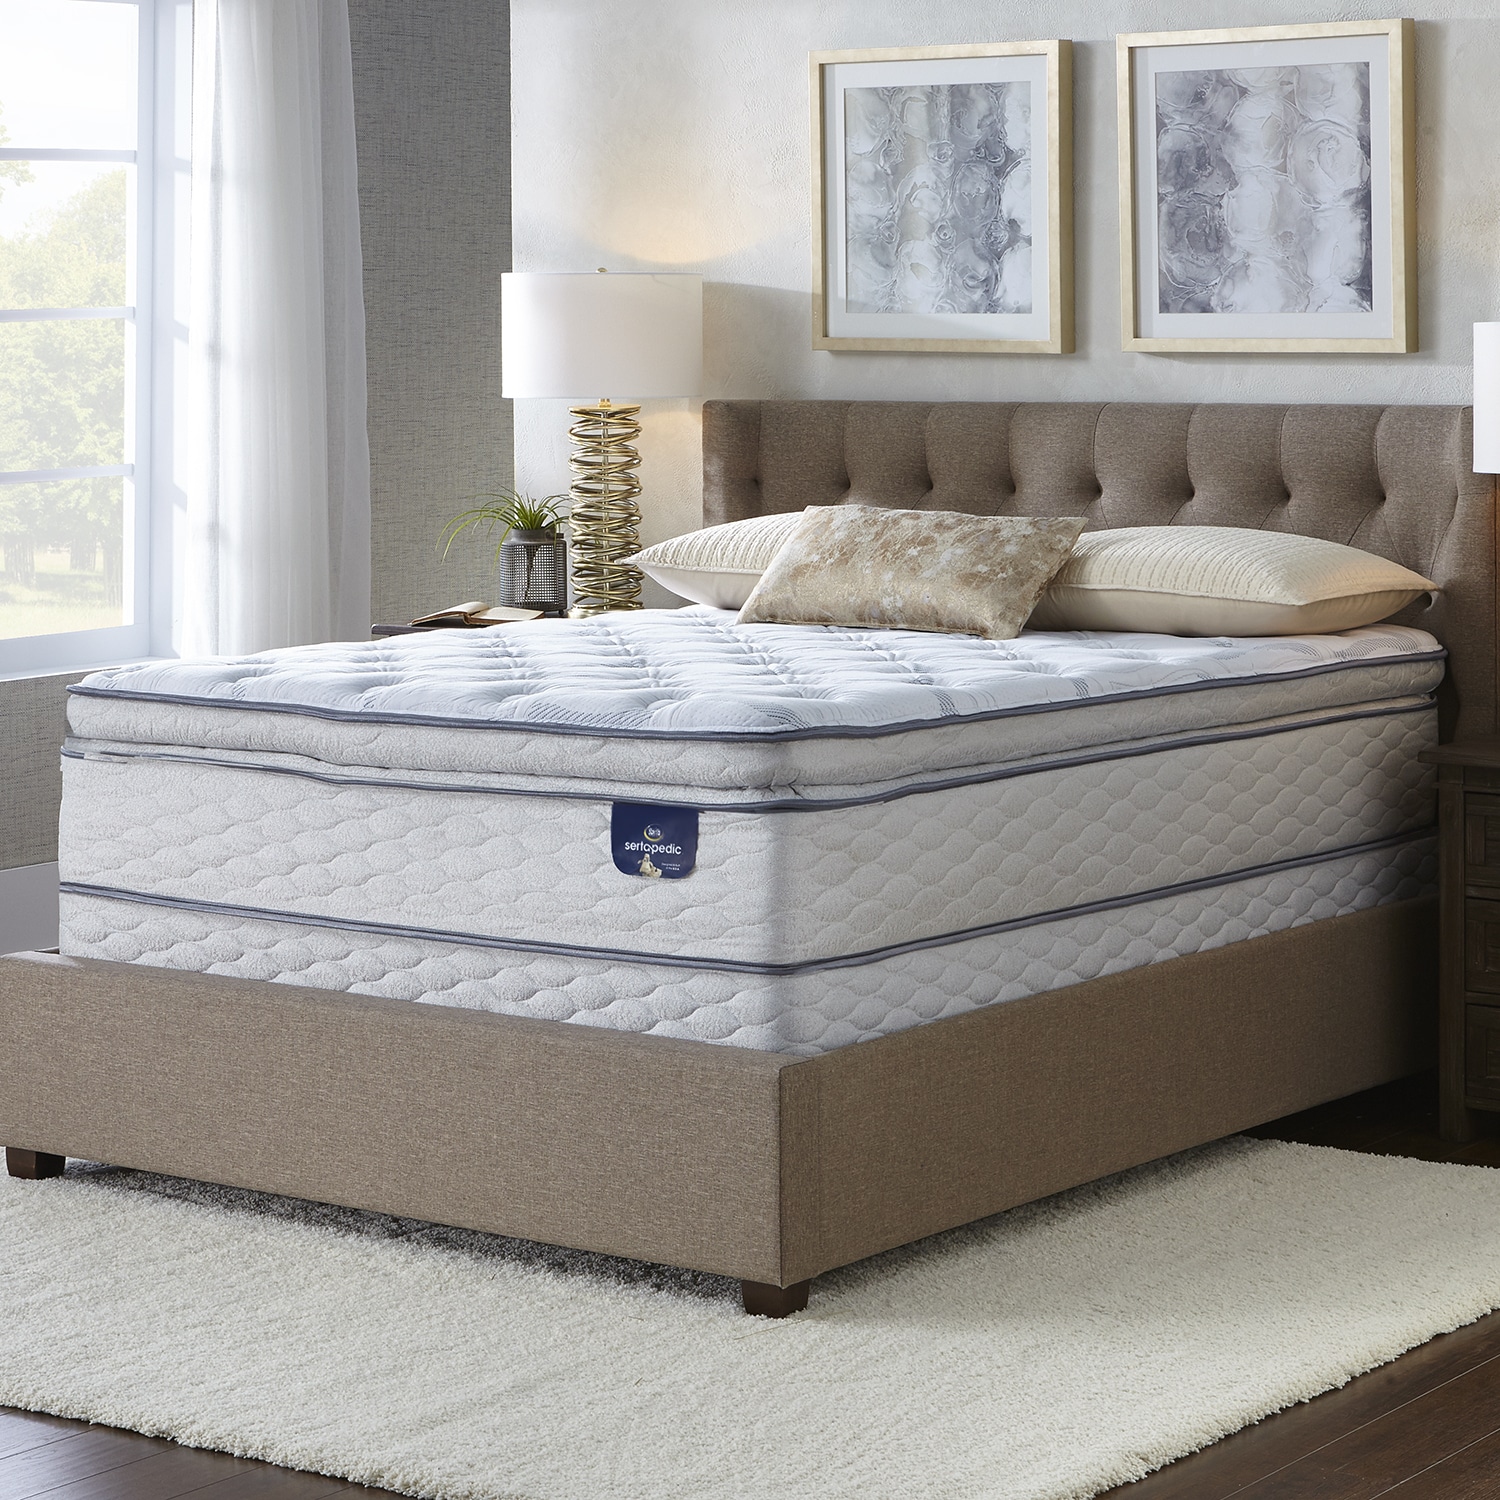 King Size Mattresses Shop Online At Overstock